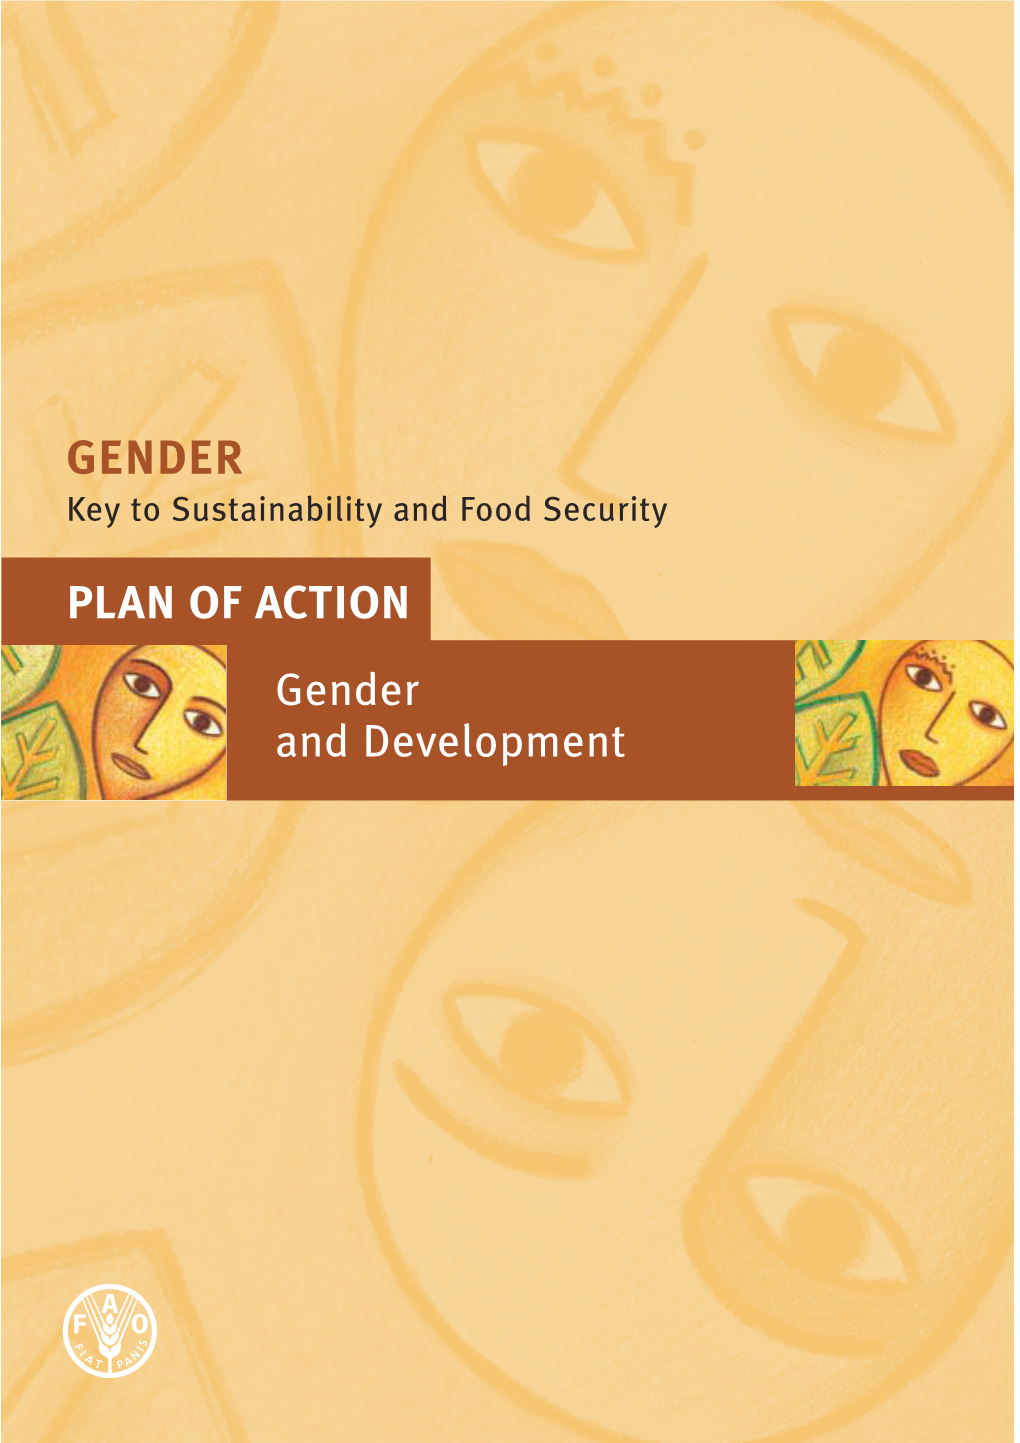 GENDER Key to Sustainability and Food Security